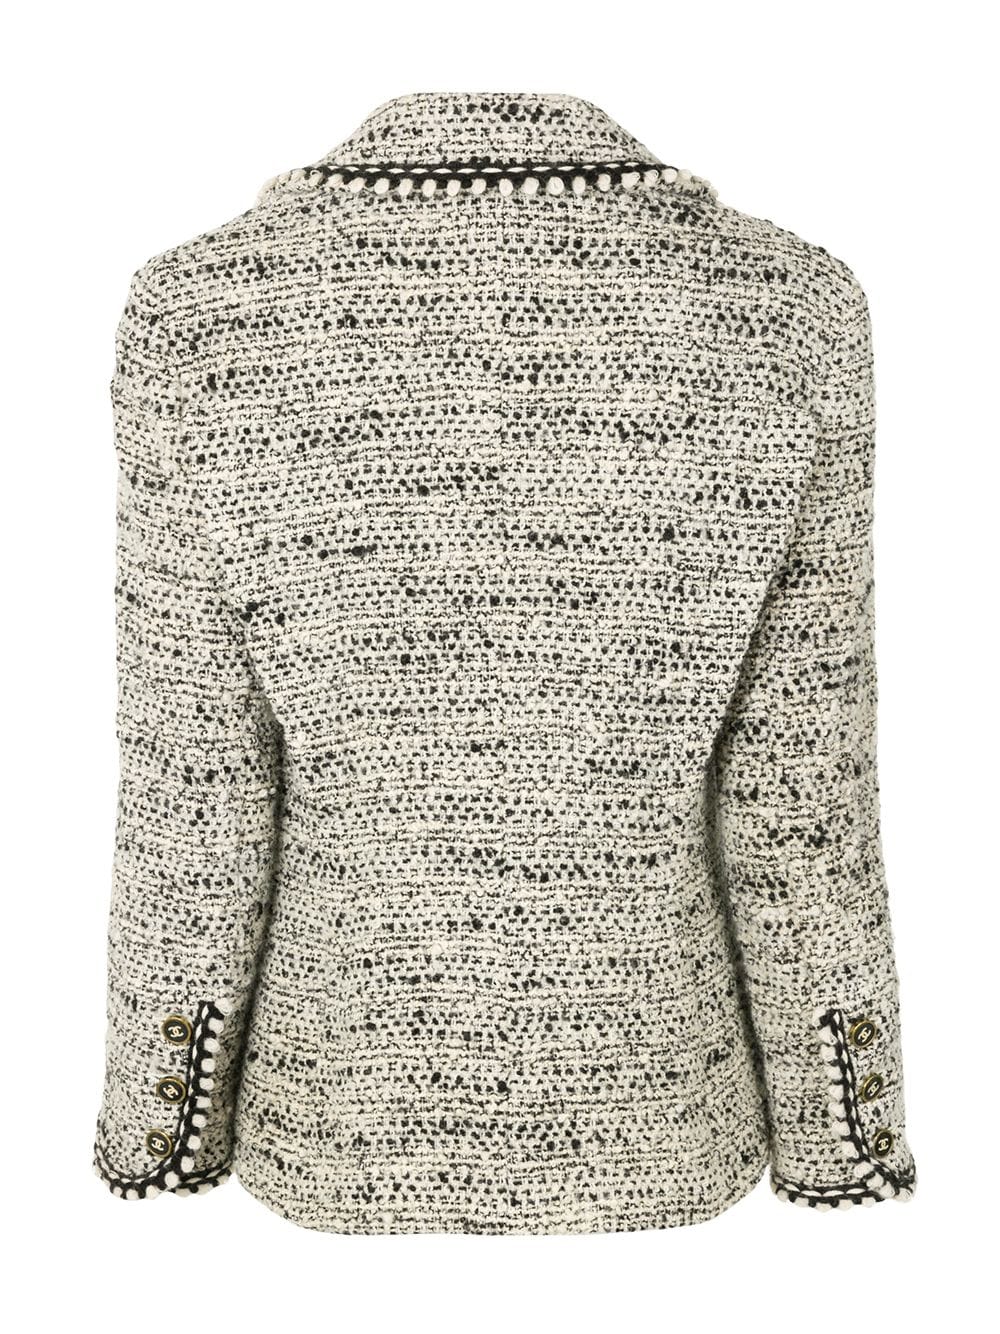 CHANEL Pre-Owned 2000s Cropped Tweed Jacket - Farfetch